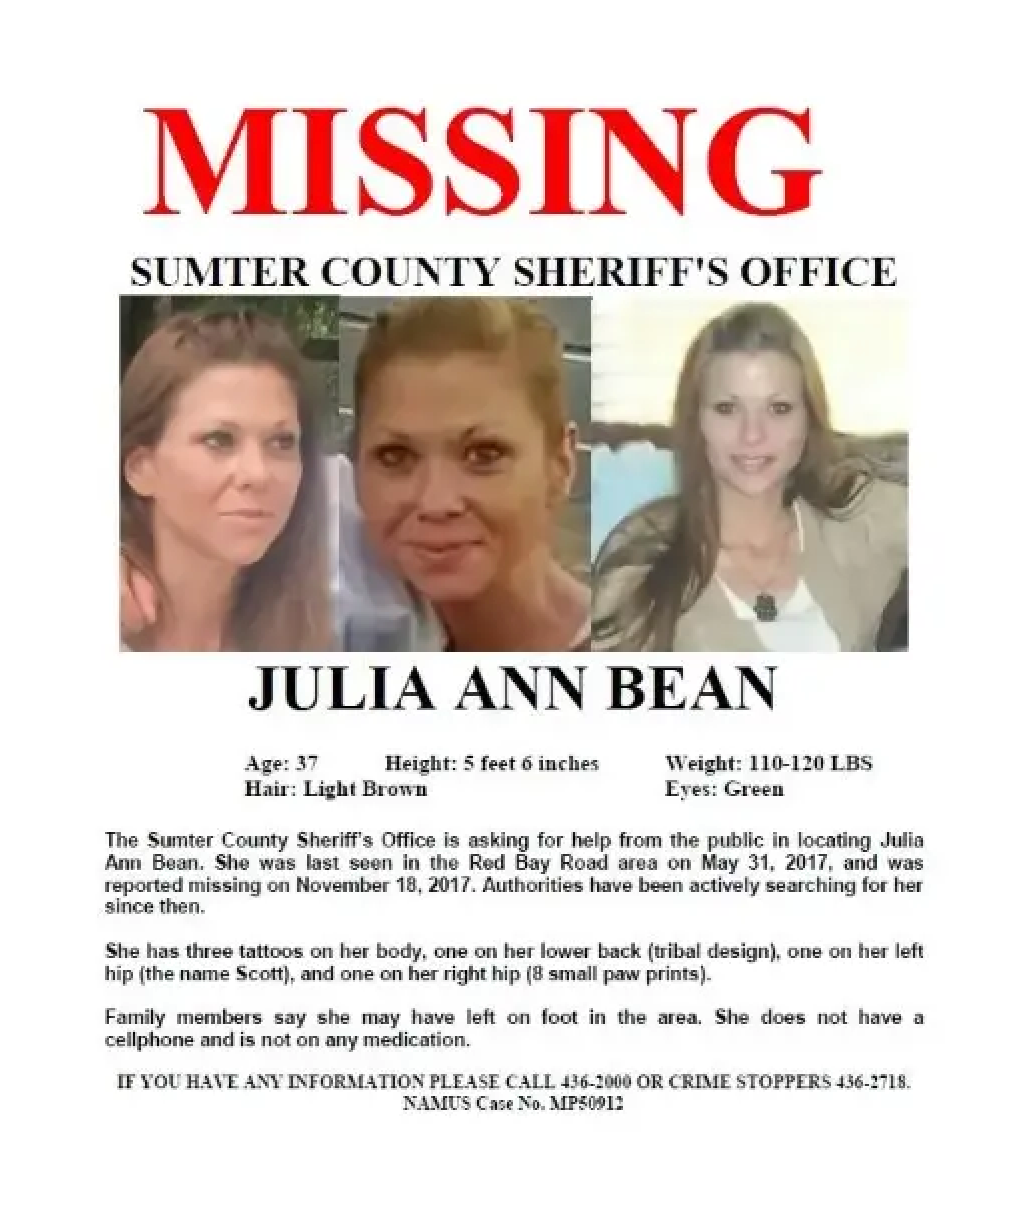 Ms Bean vanished in 2017 without her phone or her purse, her friend said